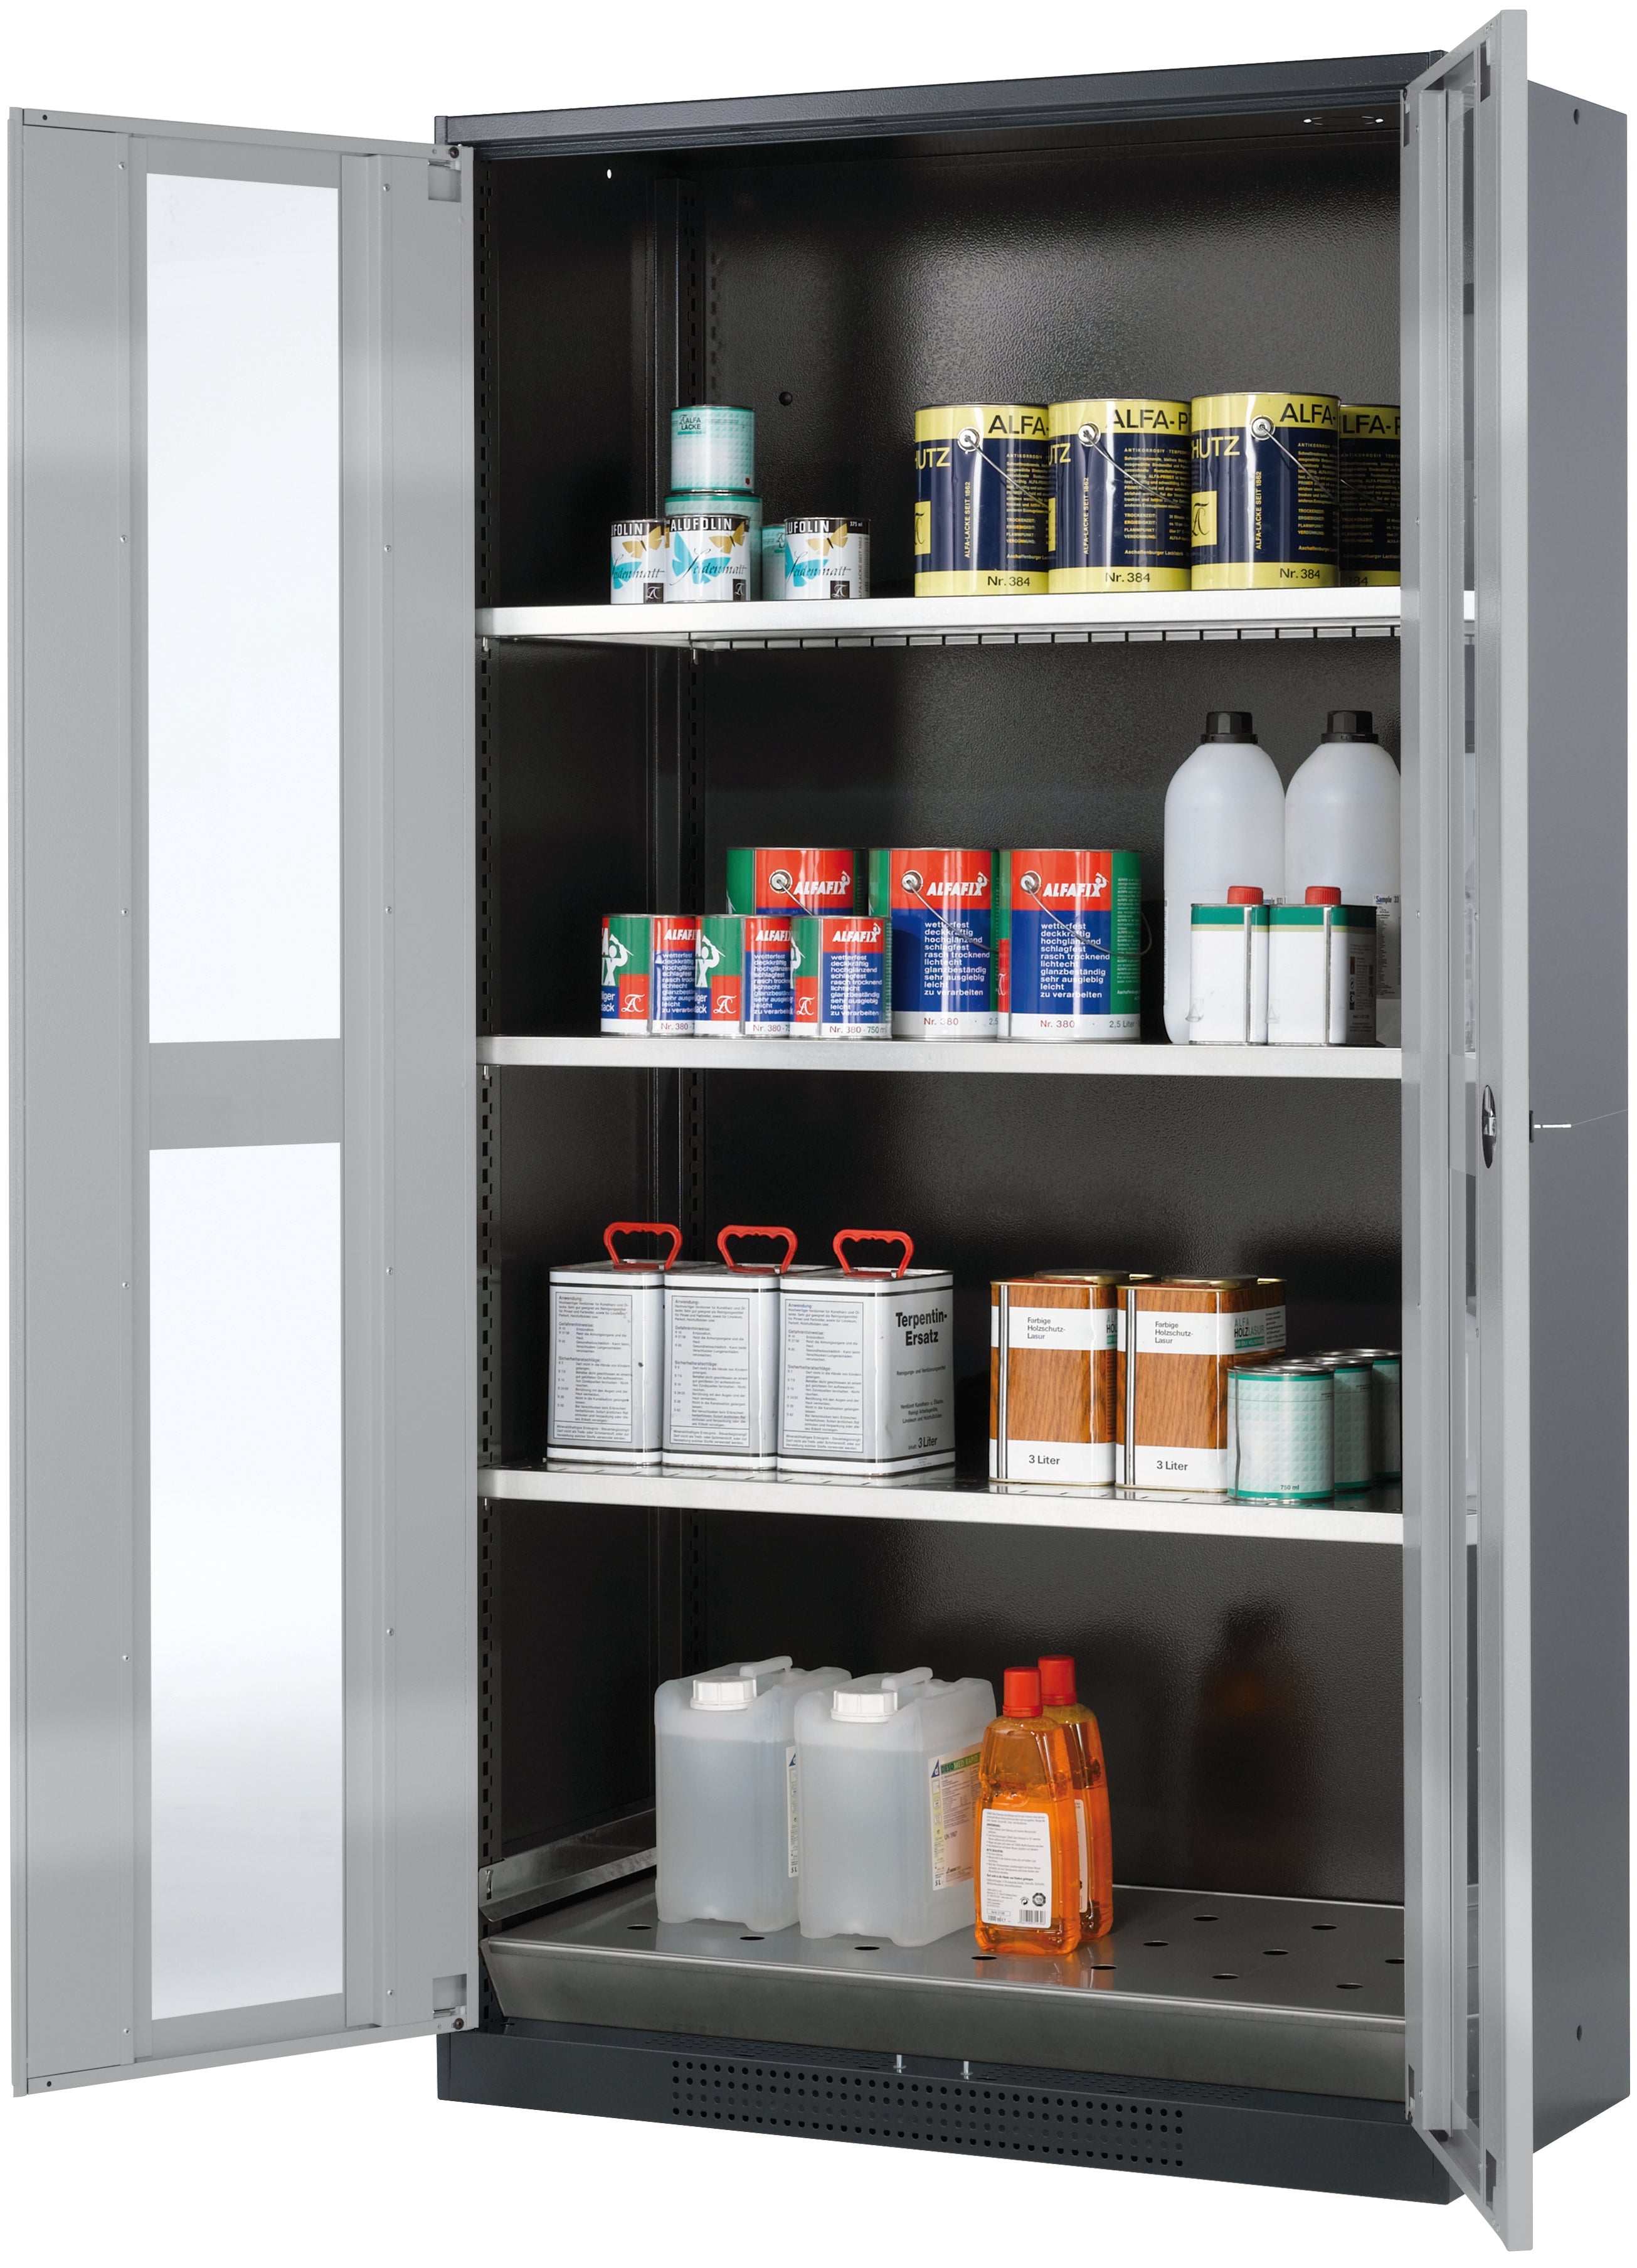 Chemical cabinet CS-CLASSIC-G model CS.195.105.WDFW in asecos silver with 3x standard shelves (sheet steel)